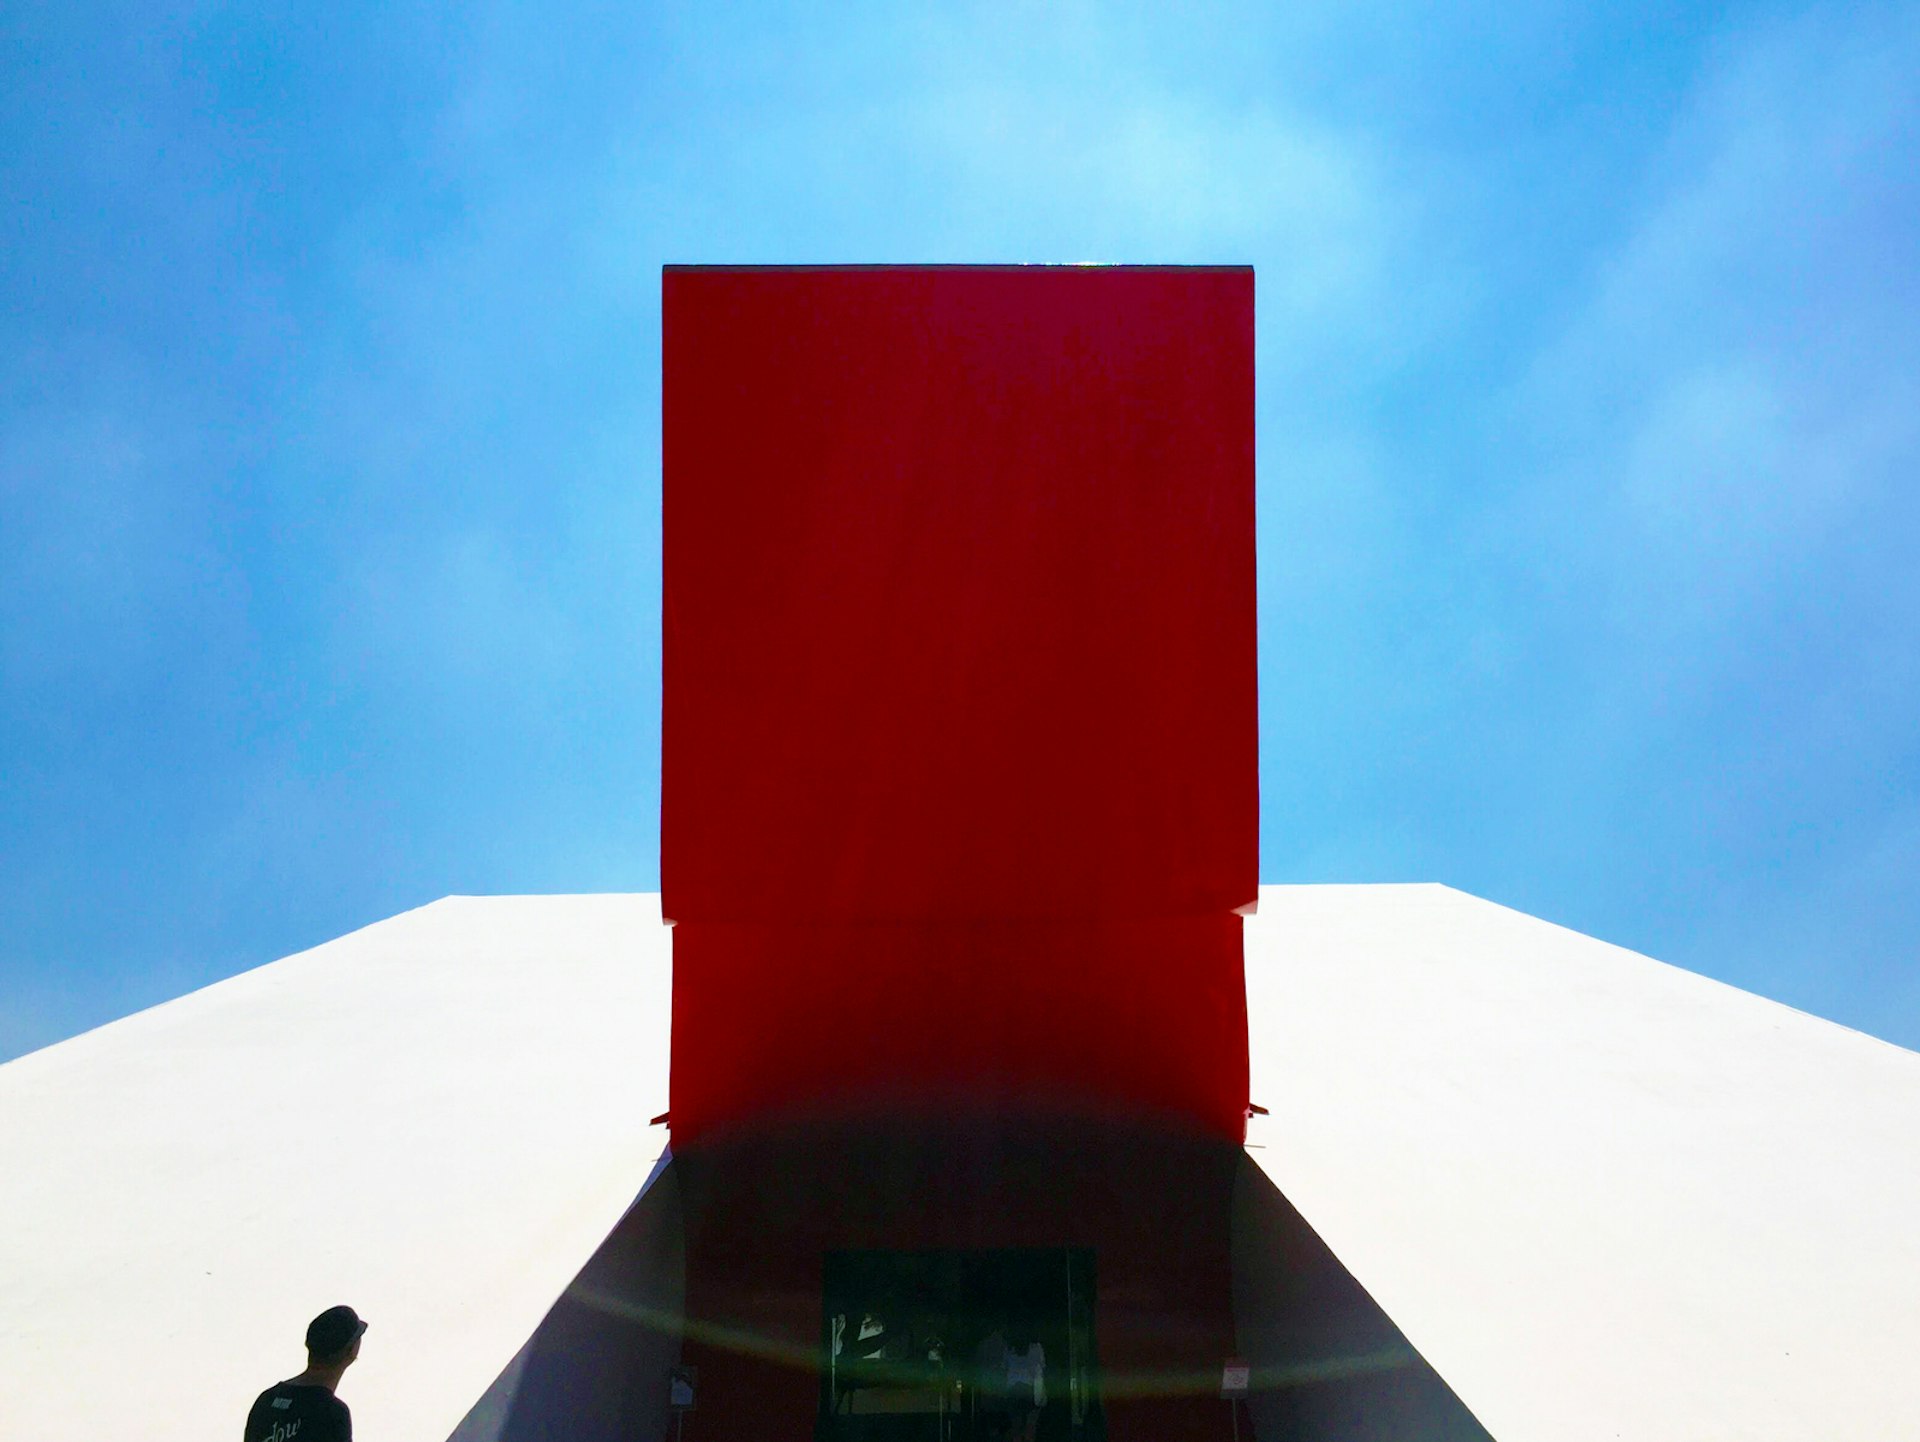 The distinctive structures of Brazilian architect Oscar Niemeyer, such as São Paulo's Auditório Ibirapuera, are famed for their modern aesthetic. Simplicity and symmetry - plus the silhouette of a friend - guide the eye in this shot © MaSovaida Morgan / Lonely Planet